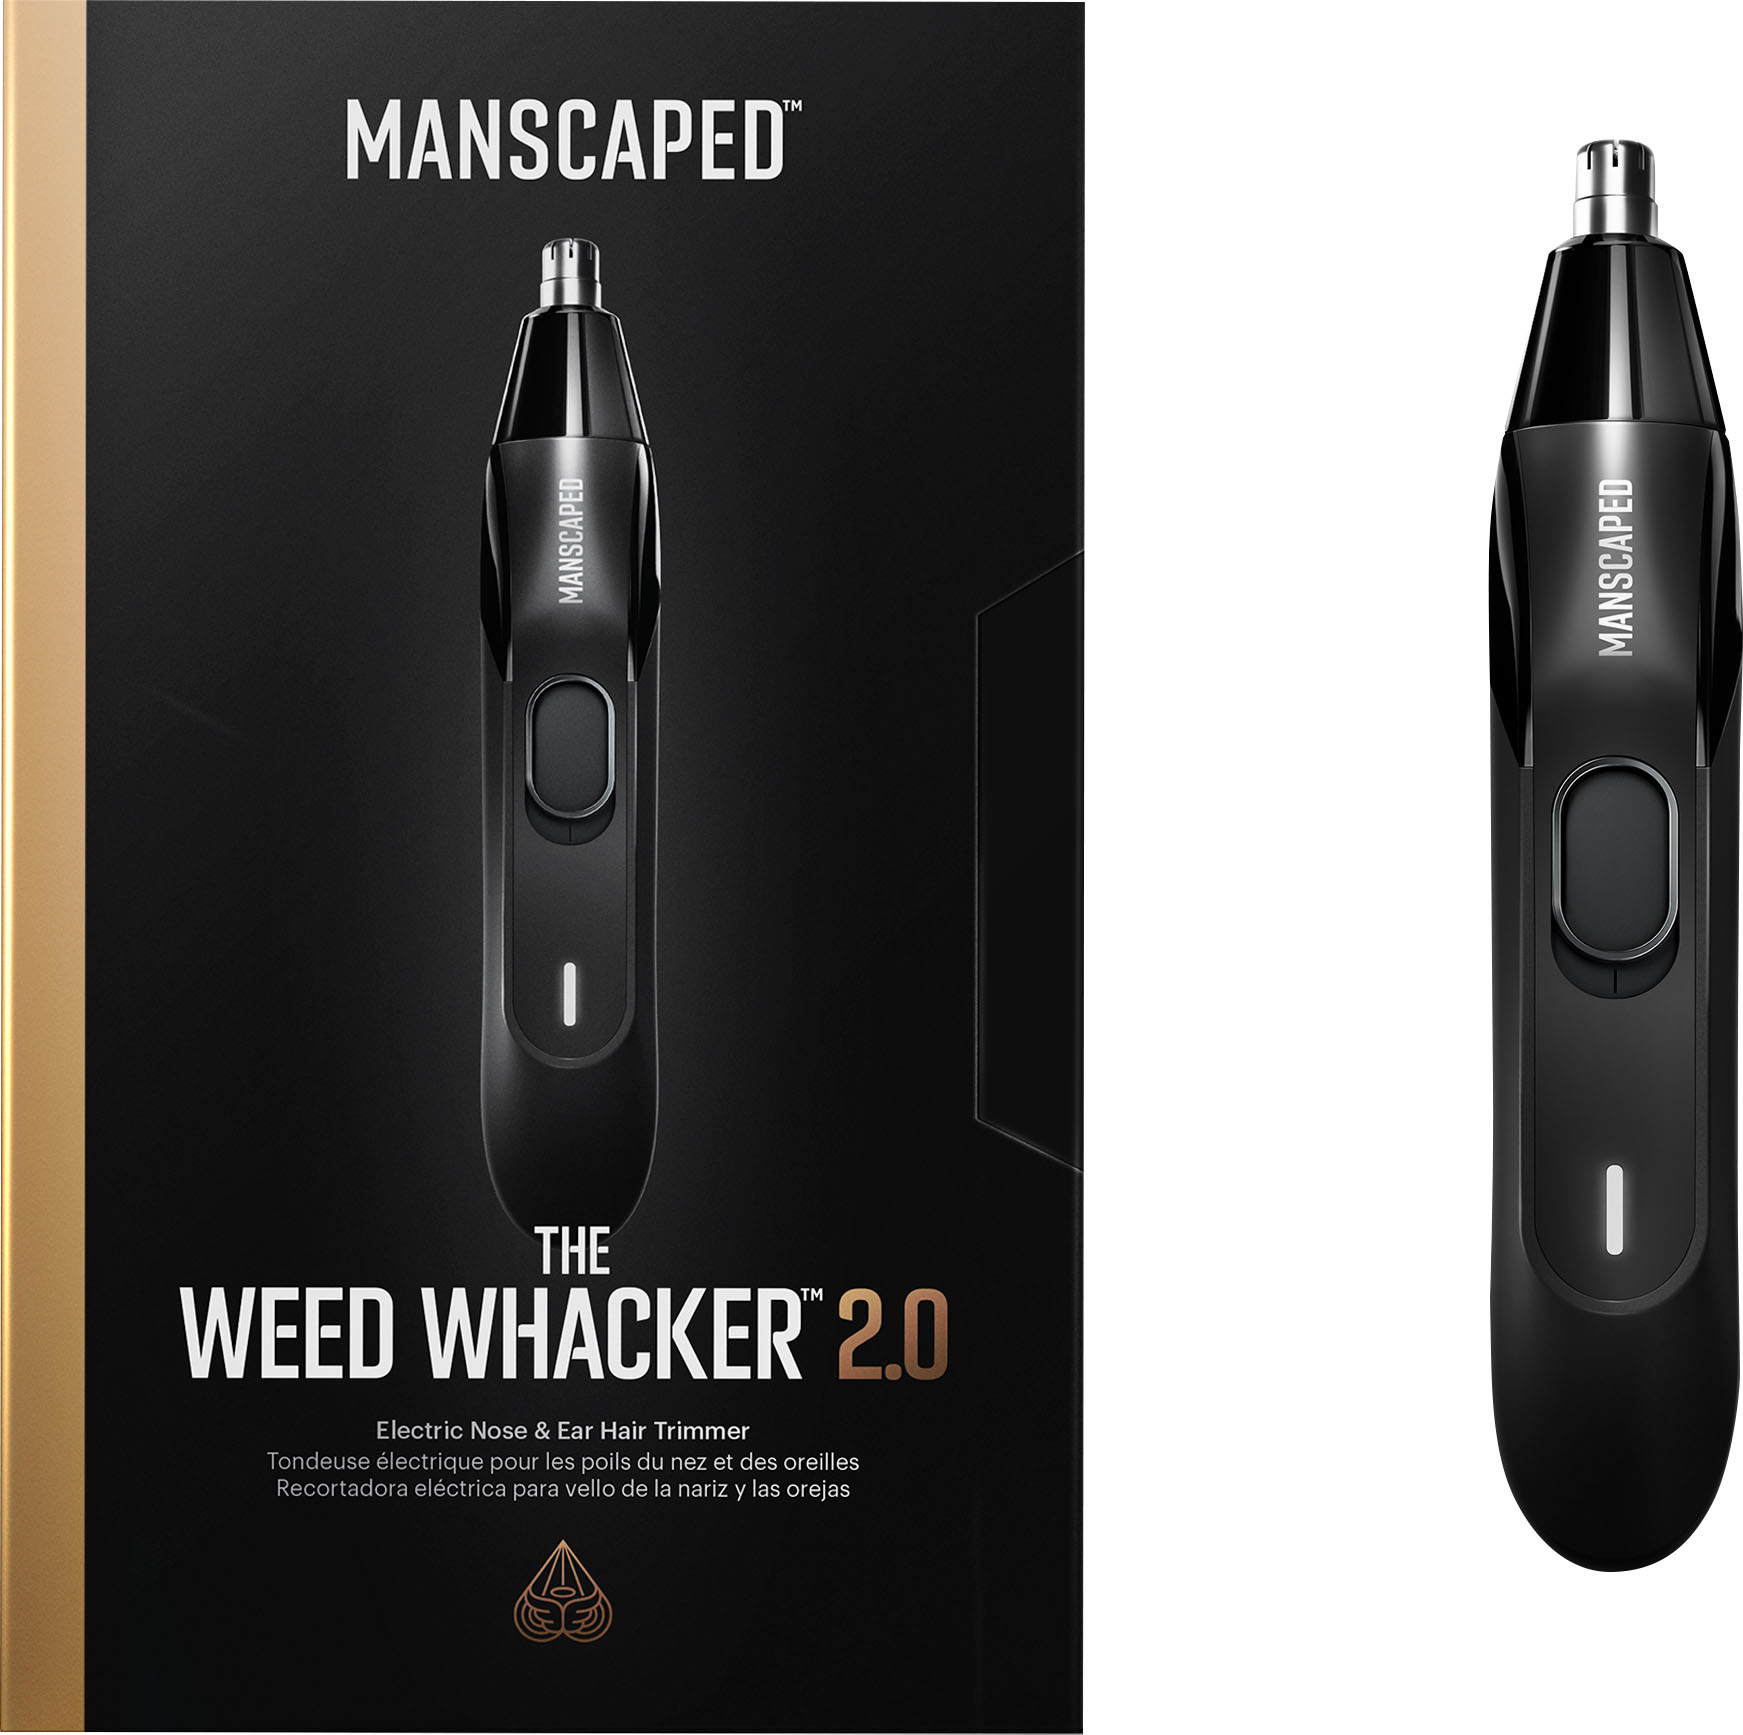 Manscaped Weed Whacker 2.0 Nose Hair Trimmer BLACK 30-00060 - Best Buy